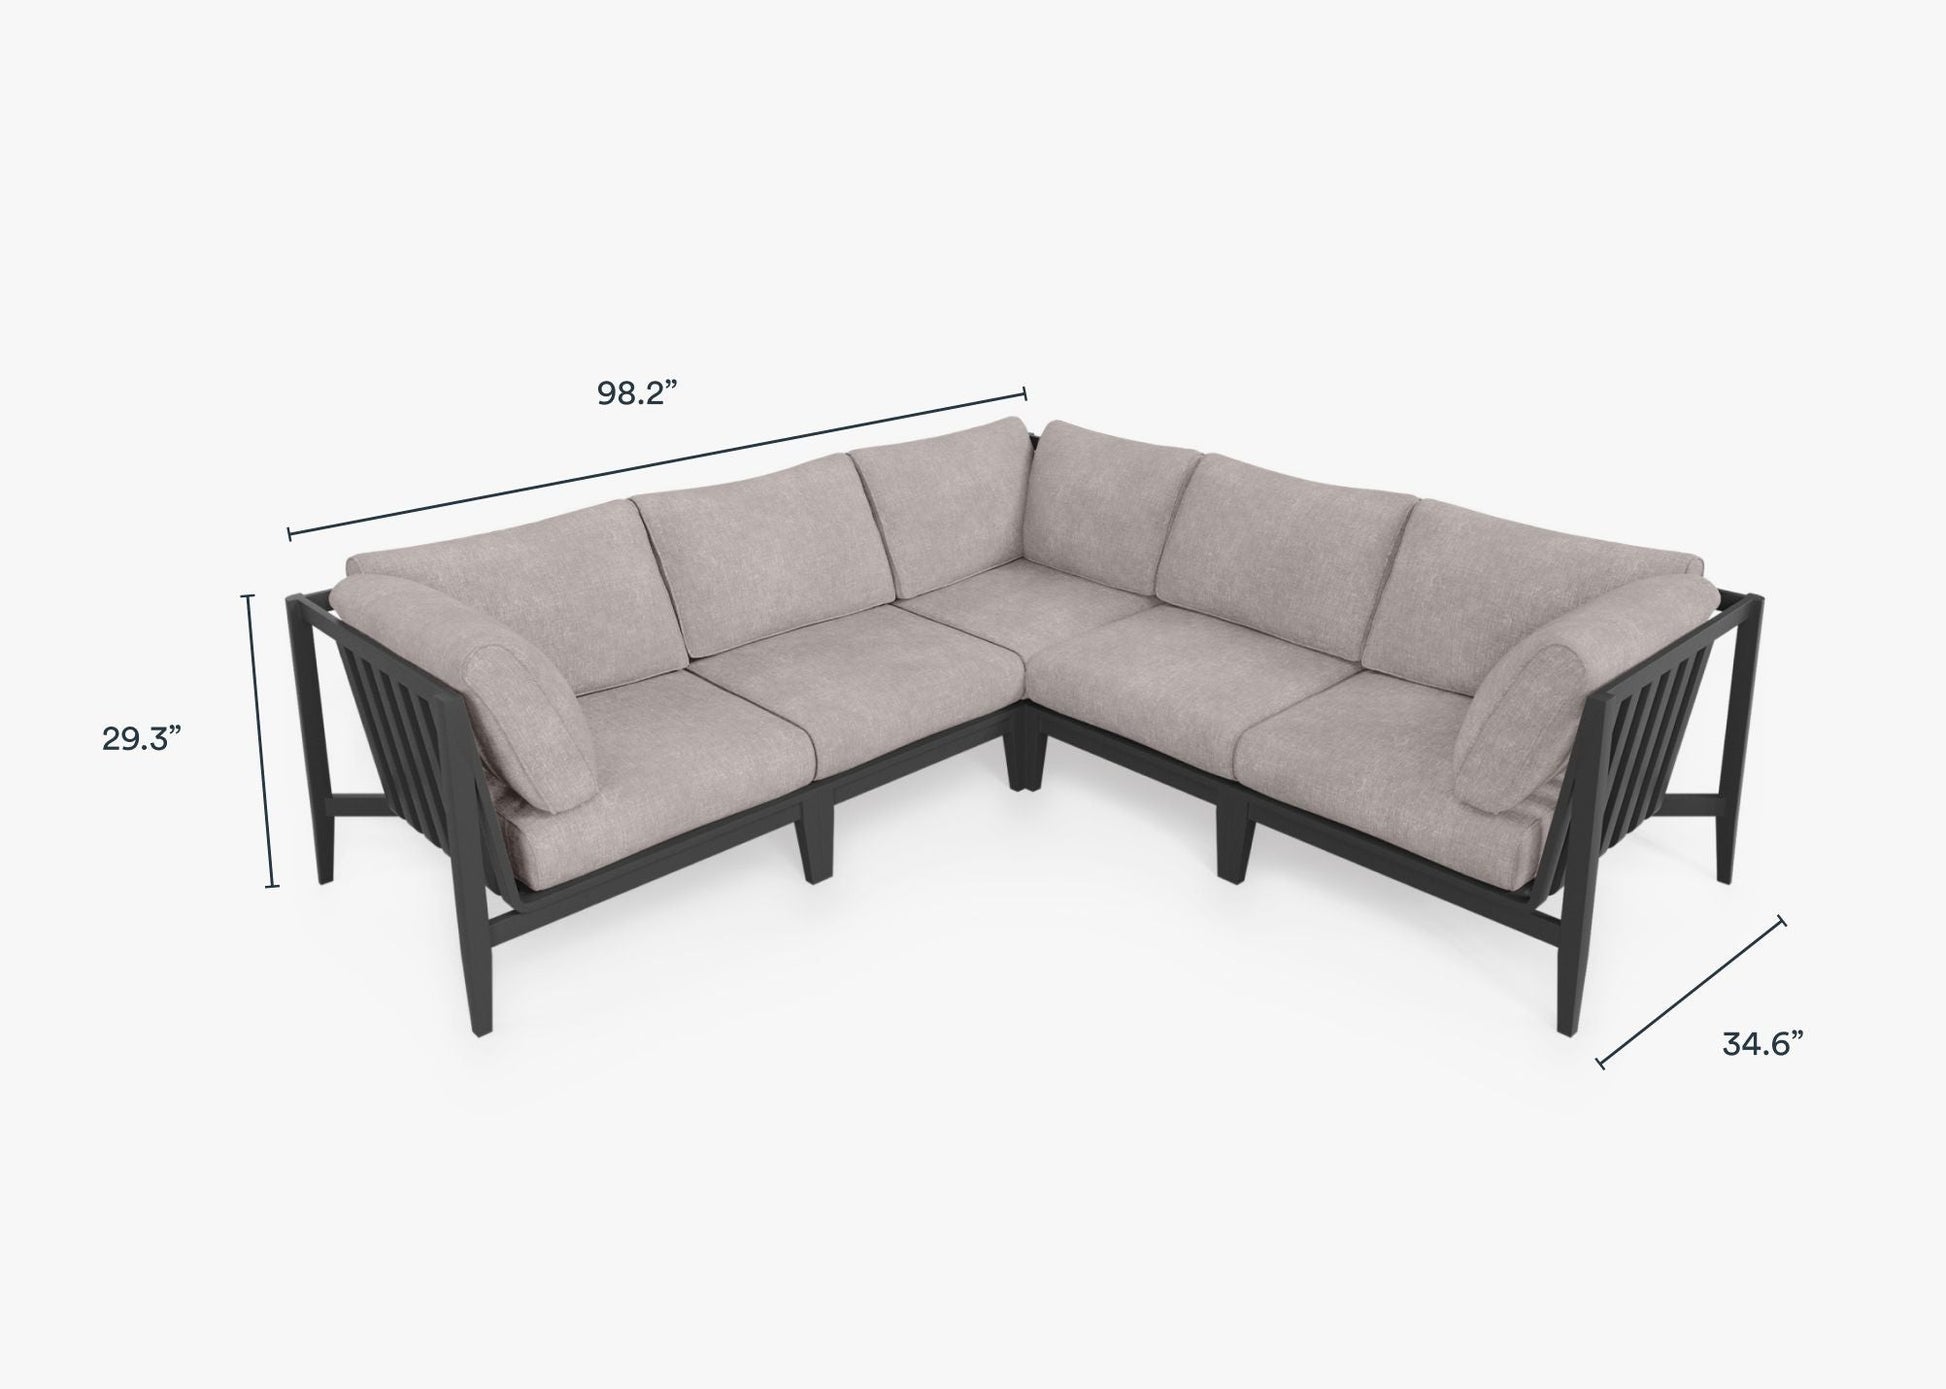 Live Outer 98" x 98" Charcoal Aluminum Outdoor Corner Sectional 5-Seat With Sandstone Gray Cushion